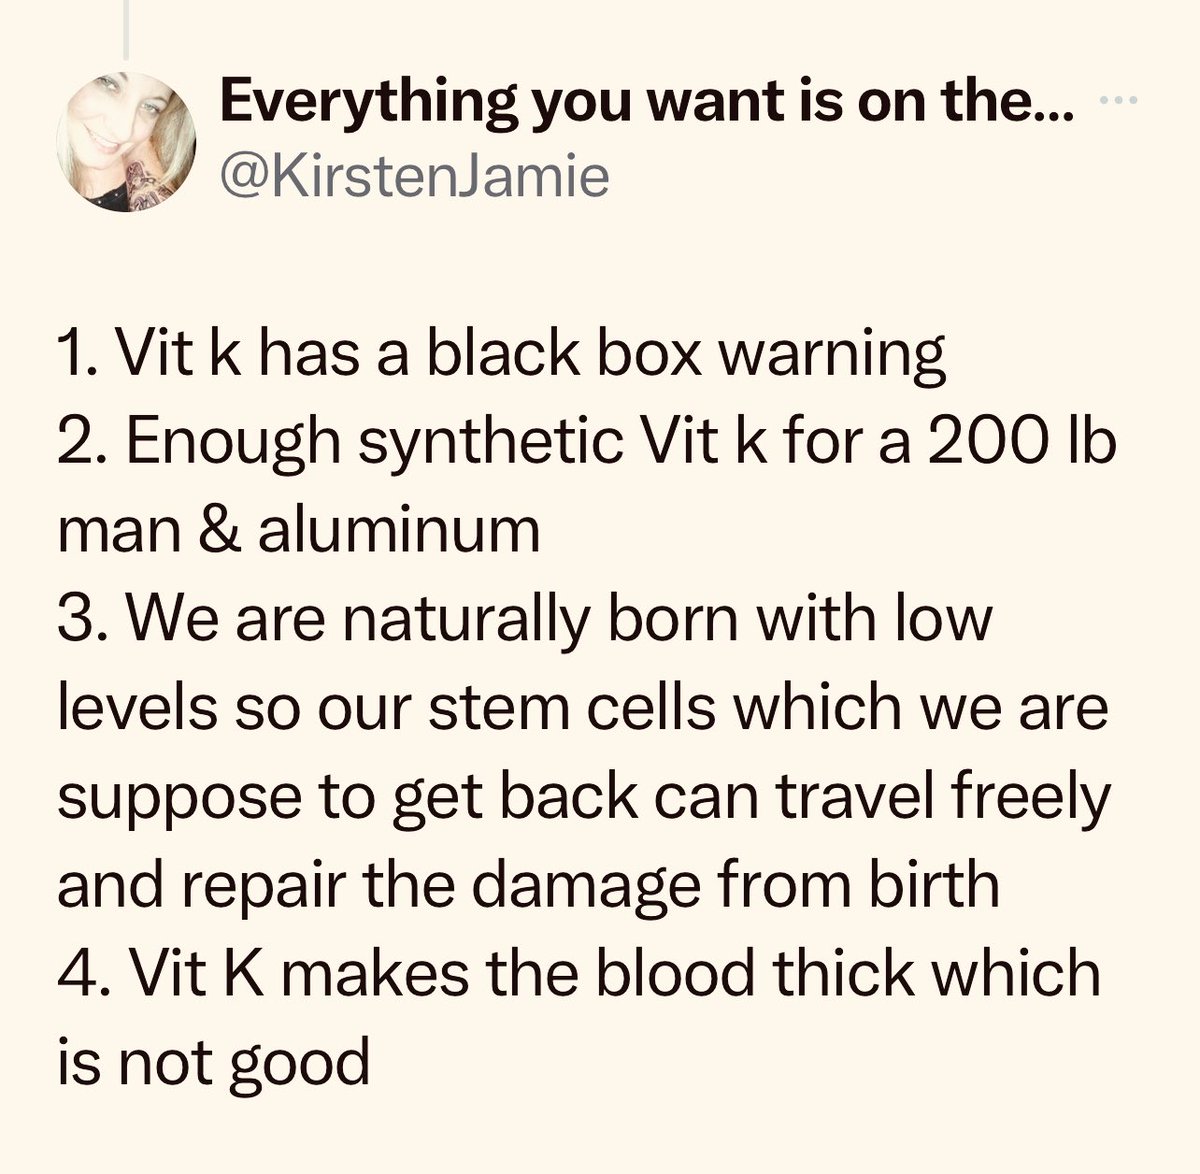 The vitamin K shot has alcohol in it which will contribute to jaundice and has aluminum in it which will cause neurological damage. It’s unnecessary. In fact, it inhibits stem cell repair after birth. Just another diabolical intervention to destroy humanity, starting at birth.